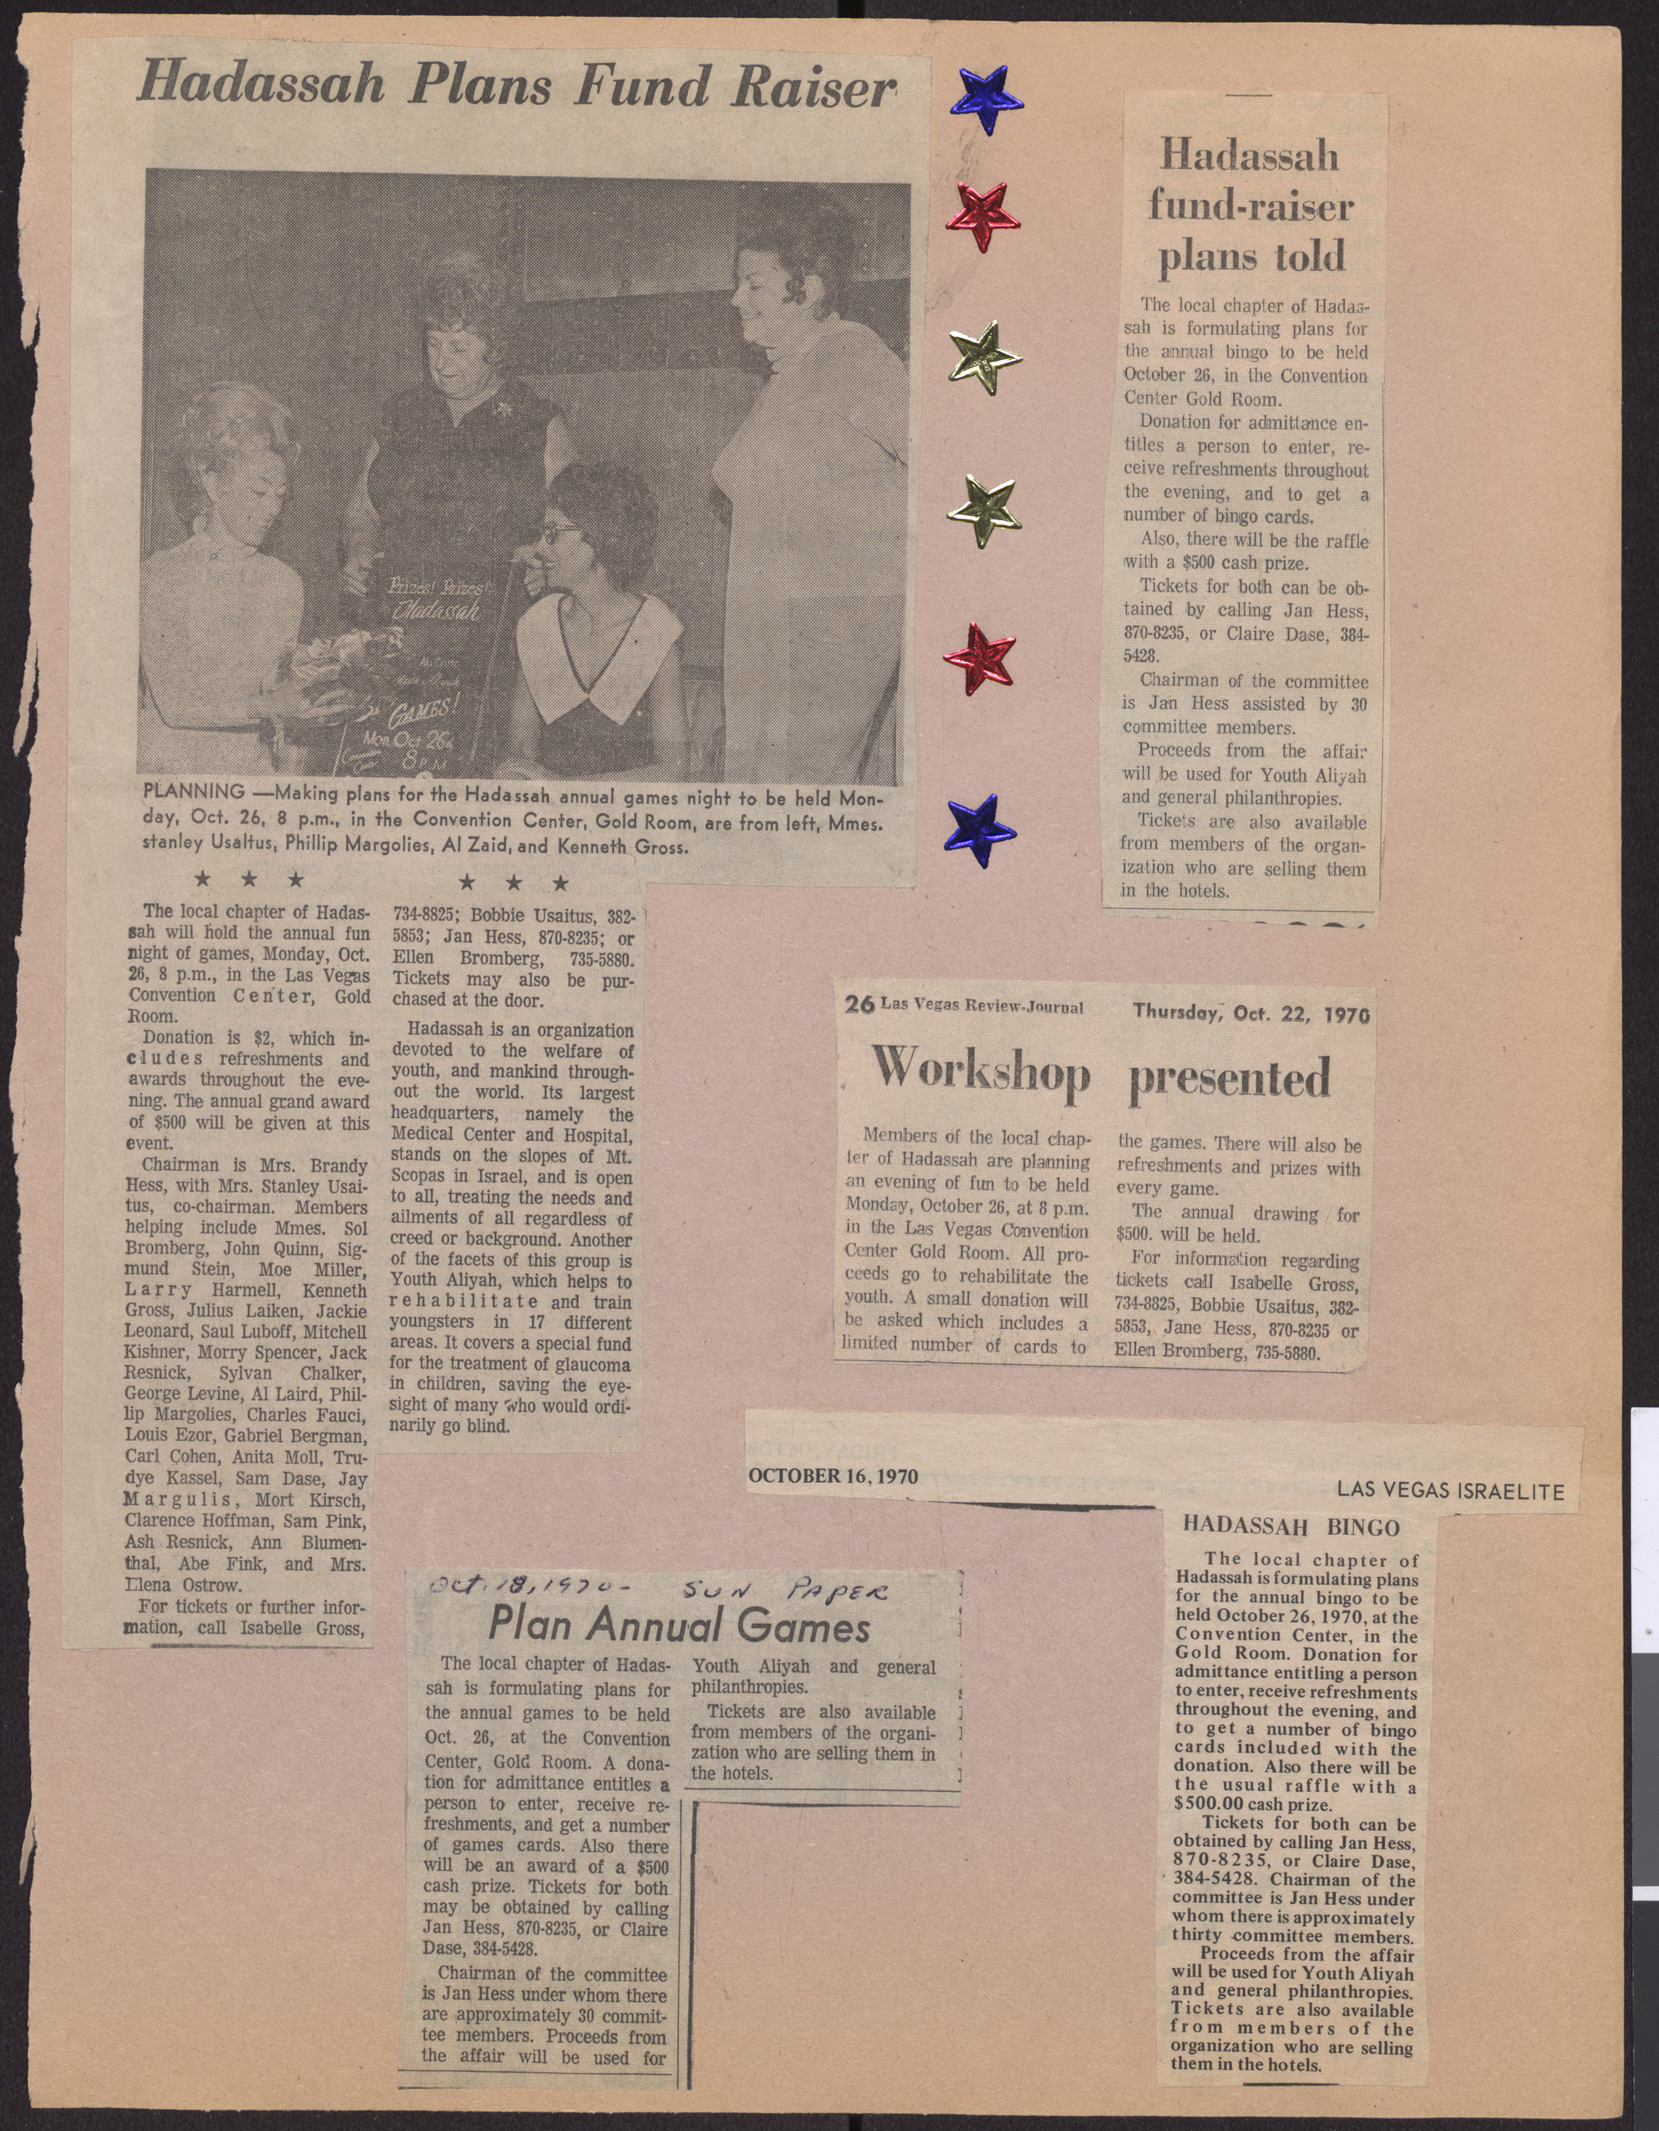 Newspaper clippings about Hadassah fundraising events, October 1970